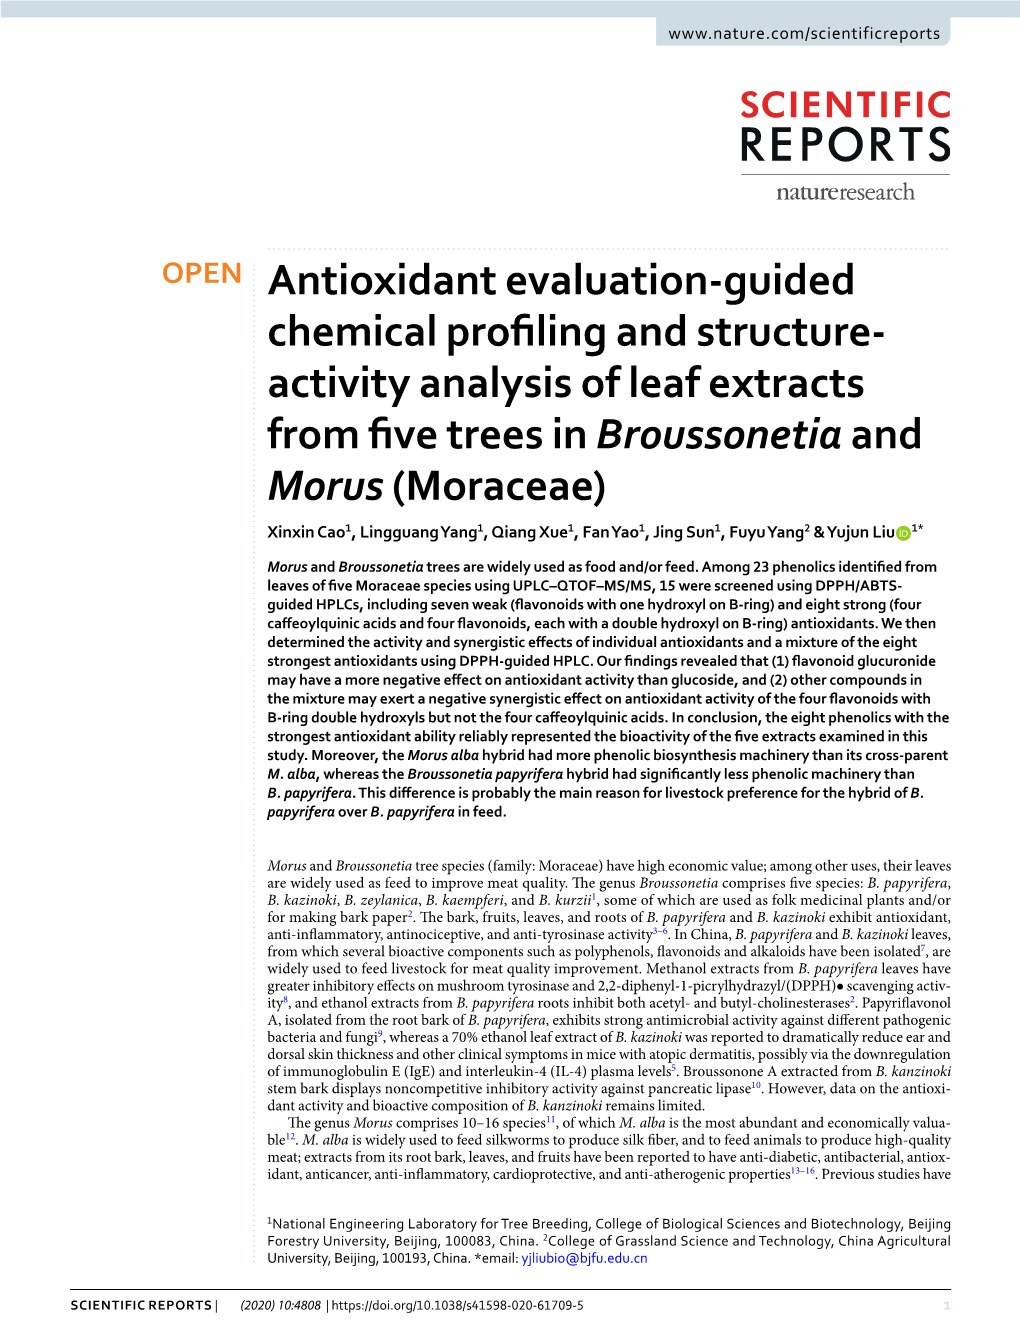 Antioxidant Evaluation-Guided Chemical Profiling and Structure